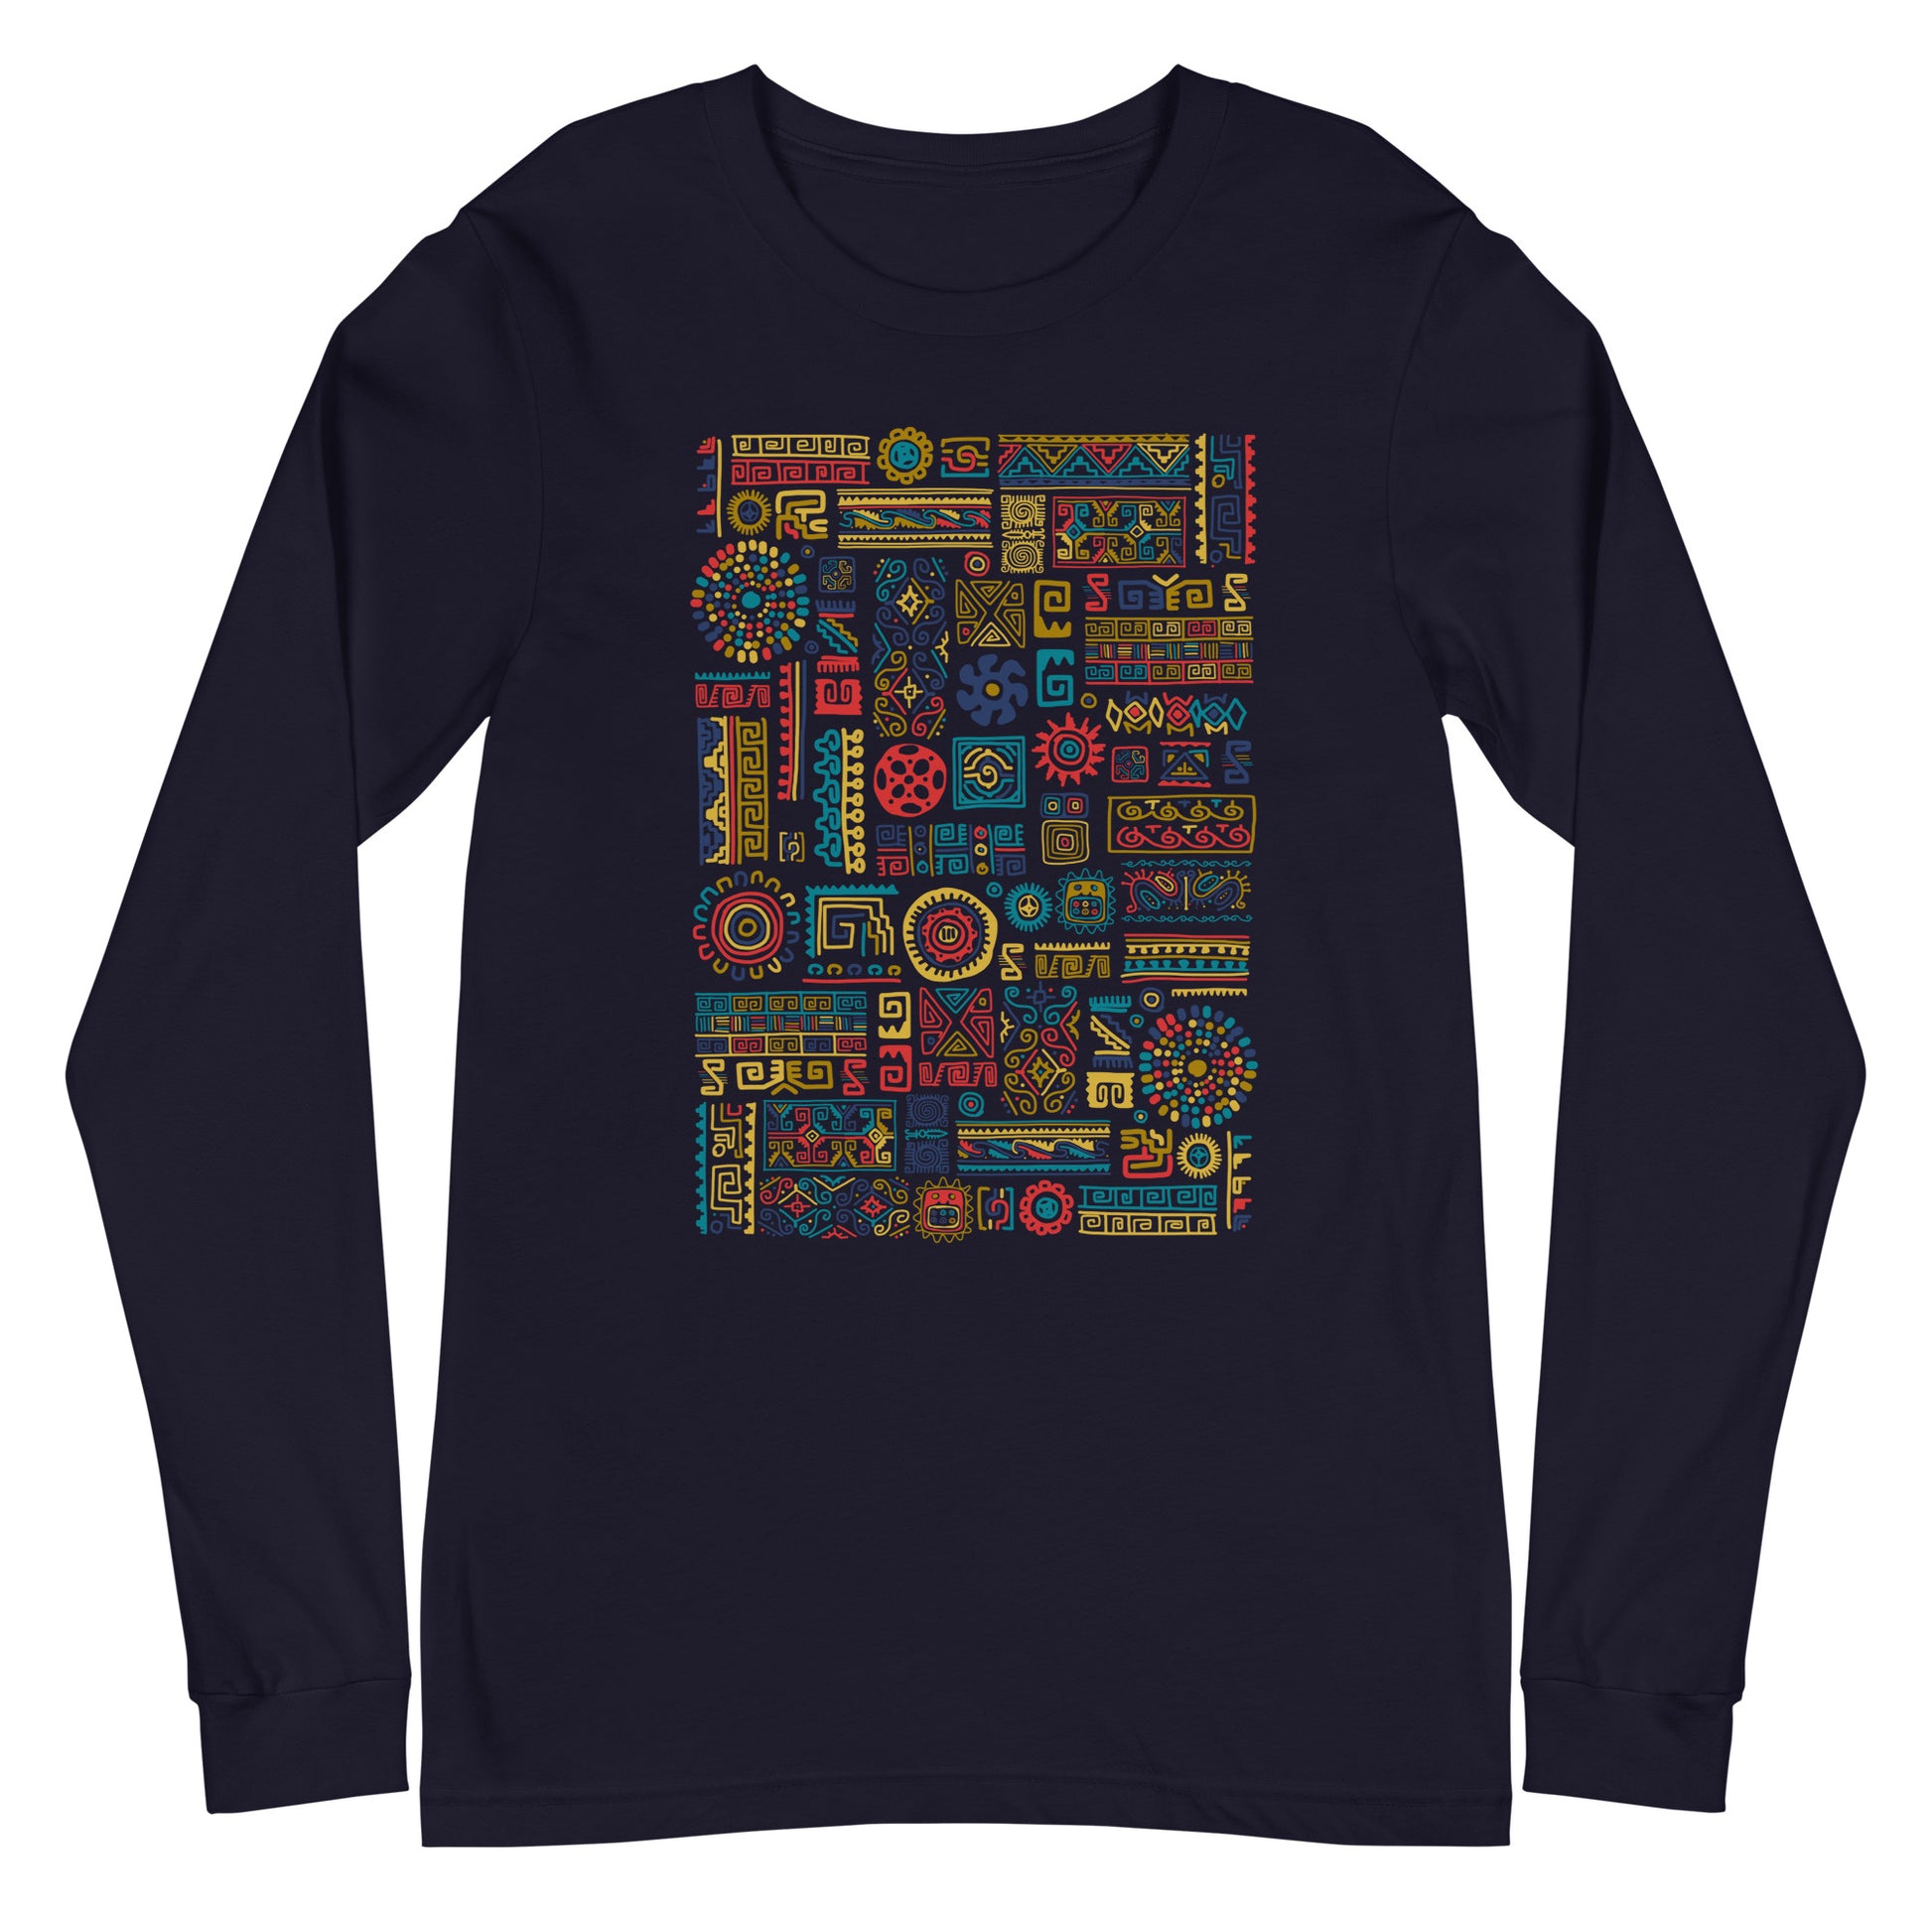 Unisex Long Sleeve dark blue color Tee with Ethnic Ornament with Mexican design elements